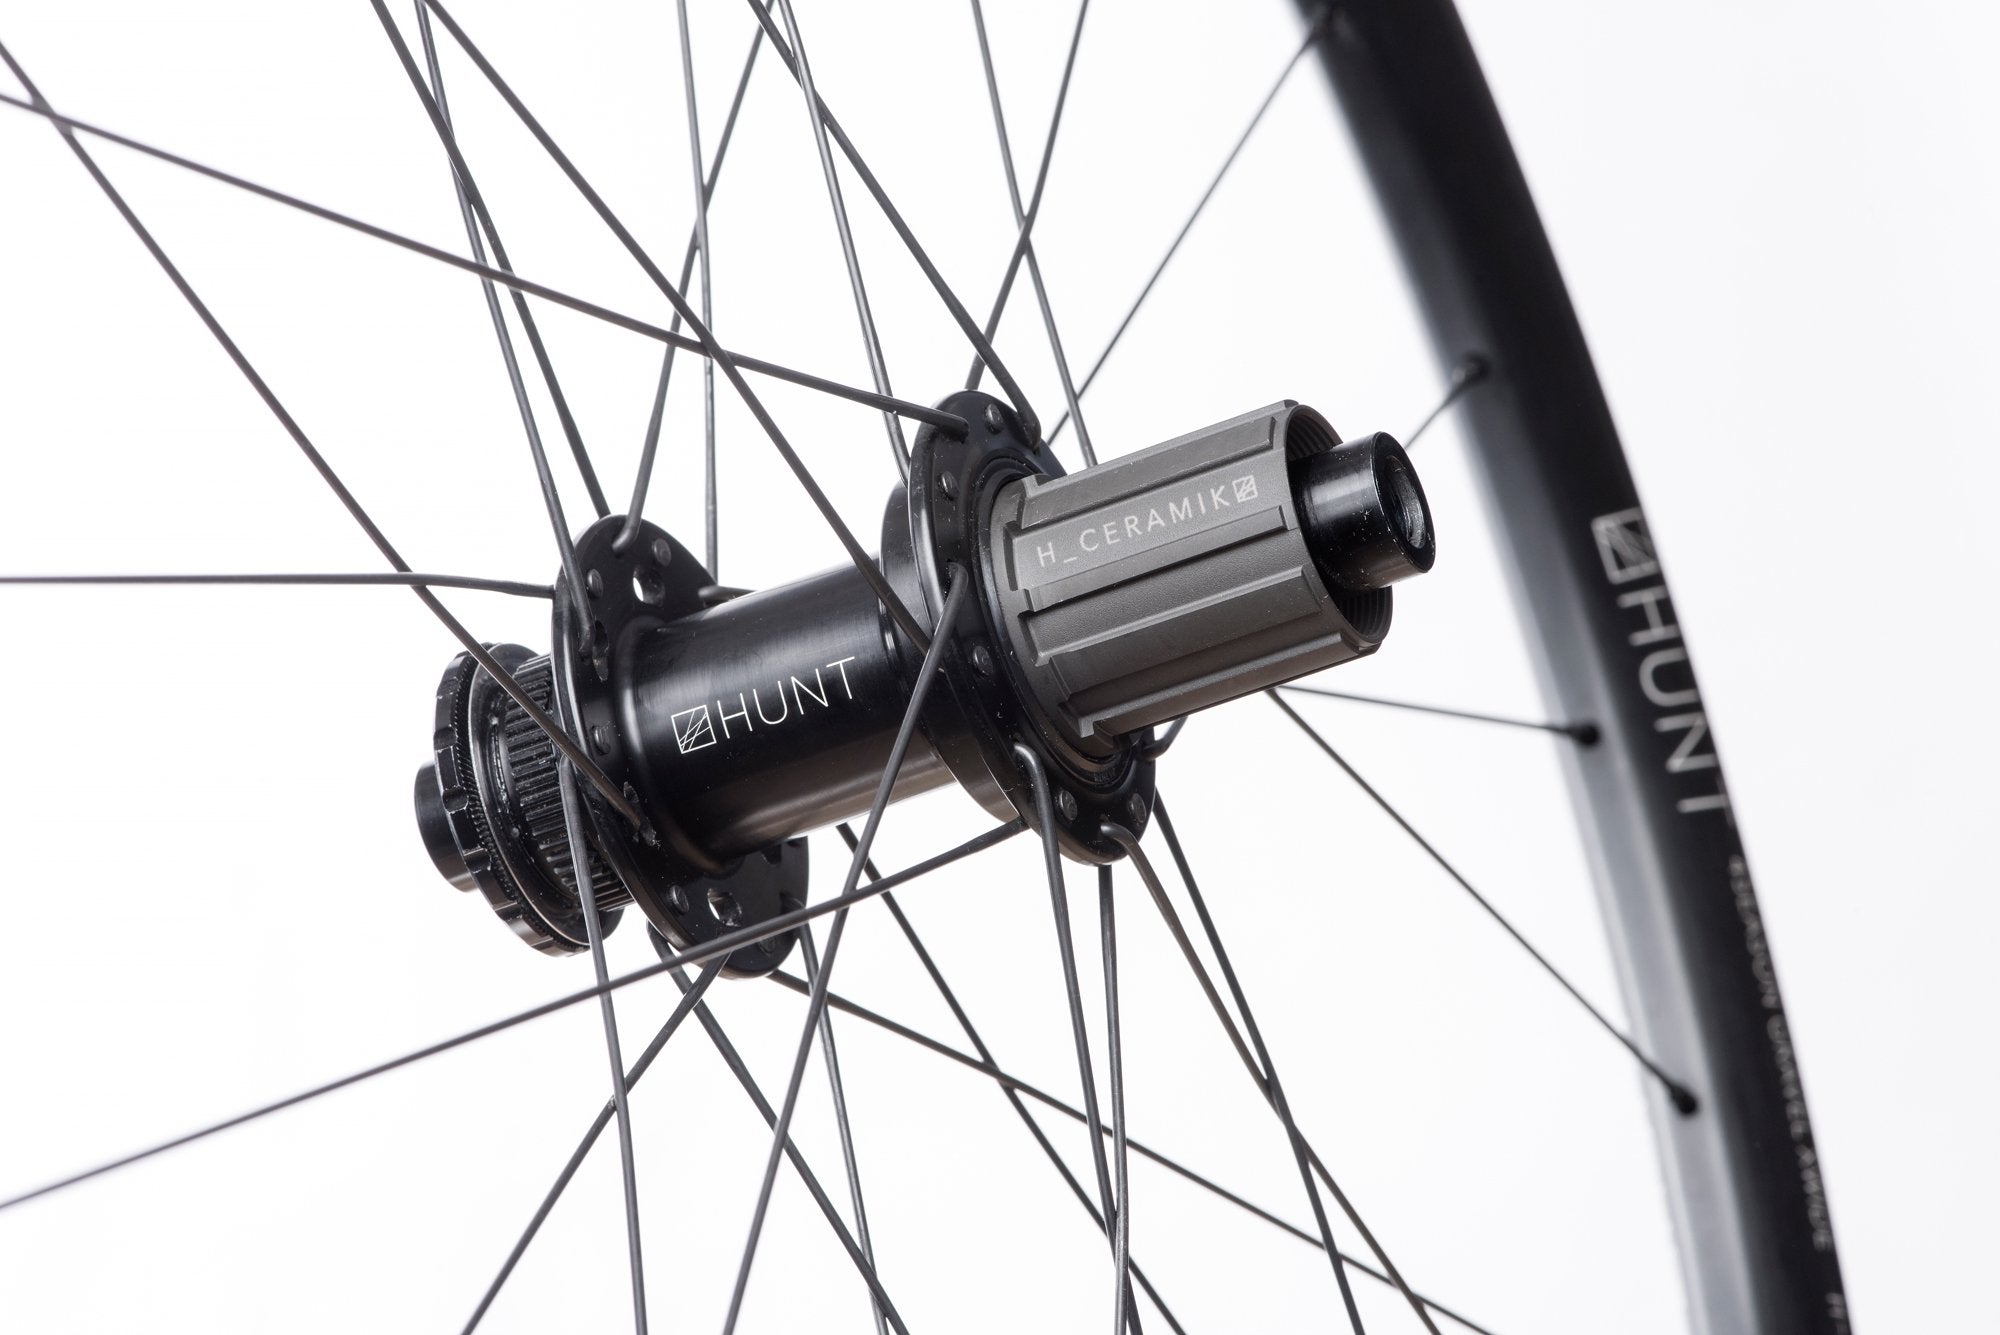 <h1>Freehub Body</h1><i>Durability is a theme for HUNT, as time and money you spend fixing is time and money you cannot spend riding or upgrading your bikes. This is especially important for a 4 Season bike you use regularly in harsh conditions. As a result, the freehub features our H_CERAMIK coating to provide excellent durability against cassette sprocket damage often seen on standard alloy freehub bodies.</i>